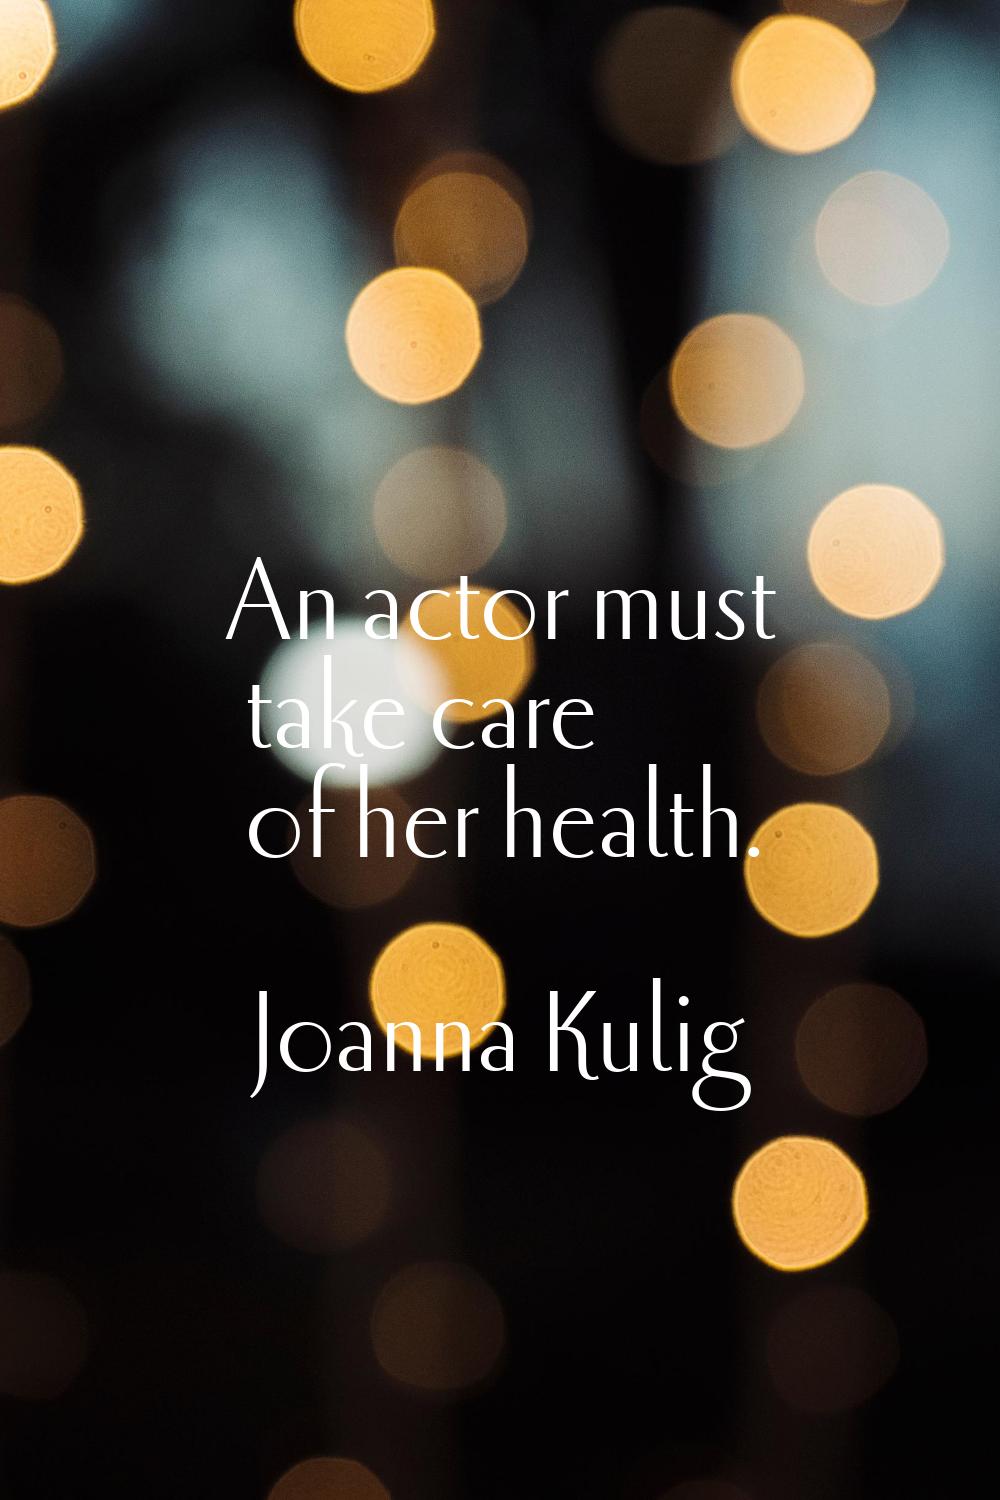 An actor must take care of her health.